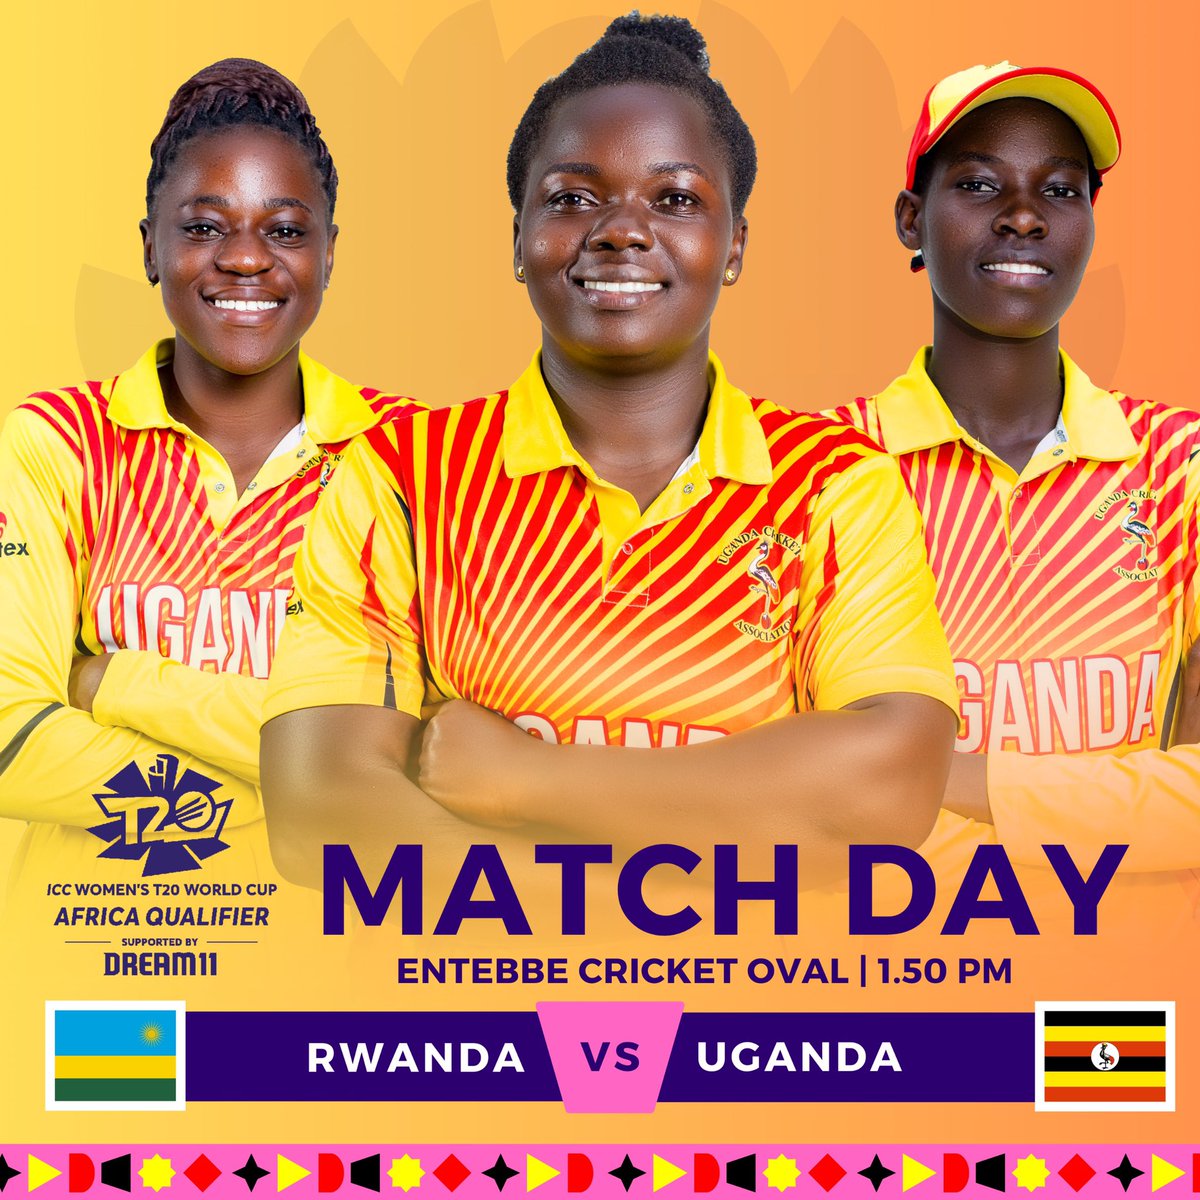 Don that beautiful jersey and cheer loud as it’s Match Day for the Victoria Pearls at the Lakeside Oval. 

#JanguNeMuno #WeBackTheVictoriaPearls #ICCWT20WCAQ